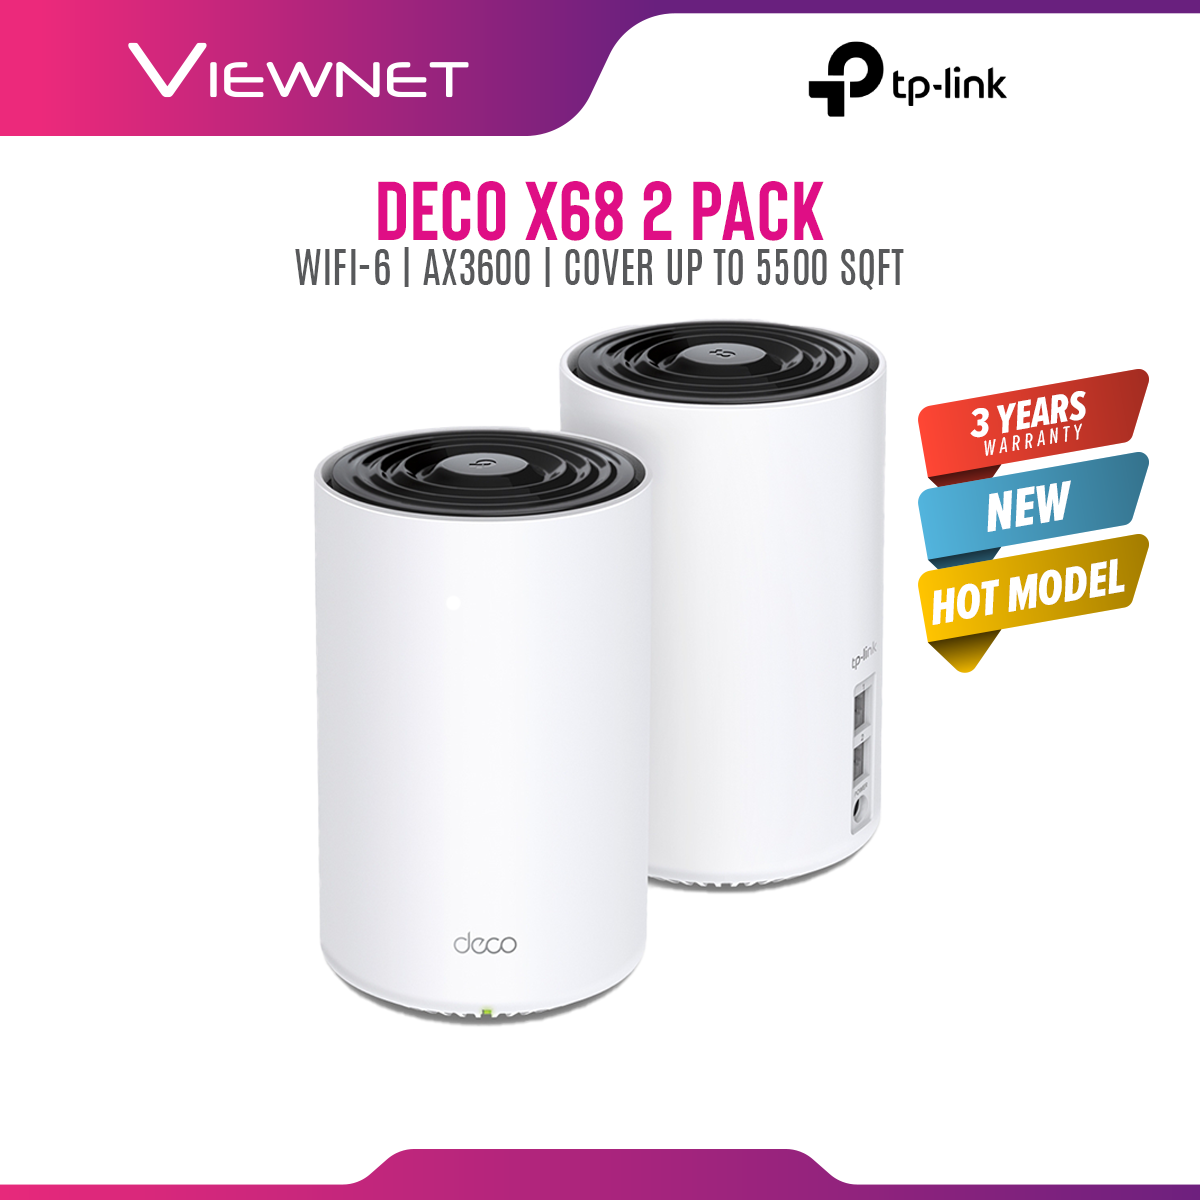 Tp-Link Deco X68 (2 Pack) AX3600 Whole Home Mesh WiFi 6 System Deco X68 1 pack Deco X68 2 pack Deco X68 3 pack